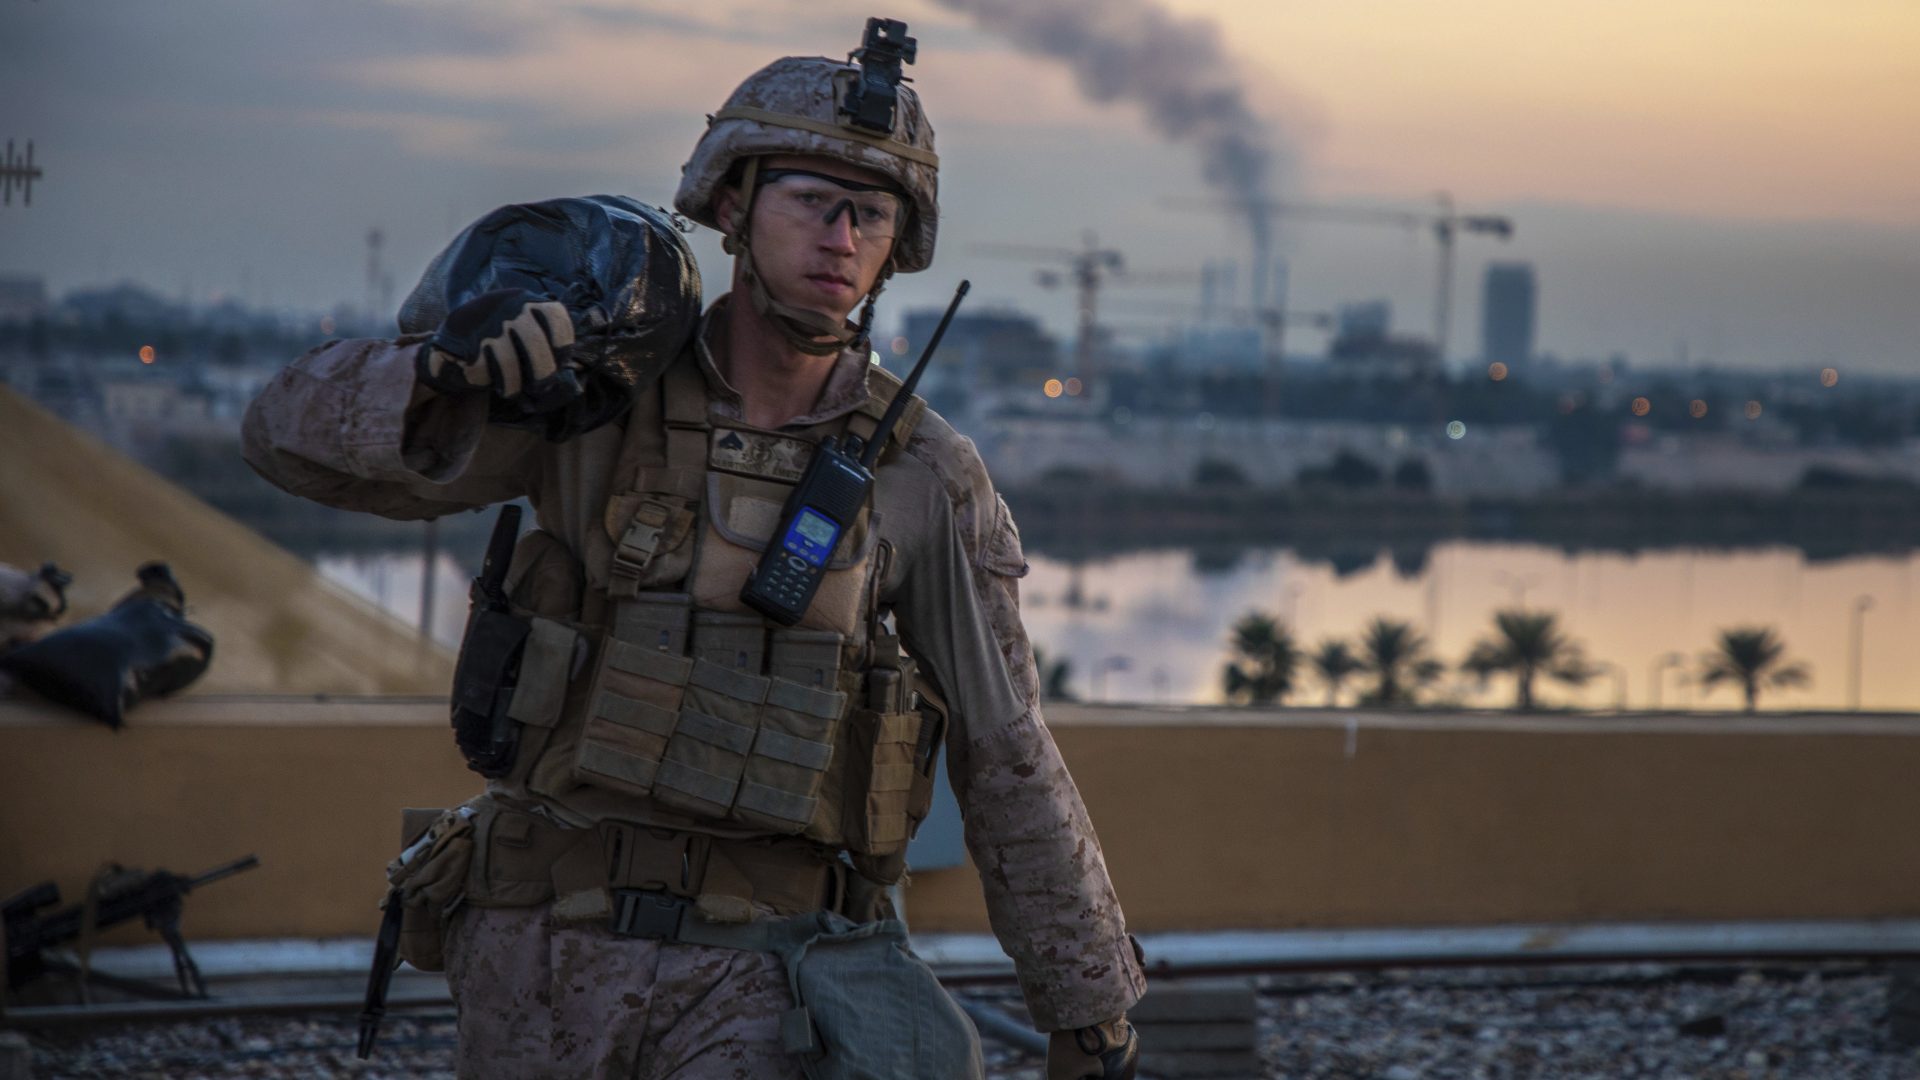 In this Saturday, Jan. 4, 2020, photo, released by the U.S. military, a U.S. Marine with 2nd Battalion, 7th Marines that is part of a quick reaction force, carries a sand bag during the reinforcement of the U.S. embassy compound in Baghdad, Iraq. The blowback over the U.S. killing of a top Iranian general mounted Sunday, Jan. 5 as Iraq's Parliament called for the expulsion of American troops from the country â€” a move that could allow a resurgence of the Islamic State group.